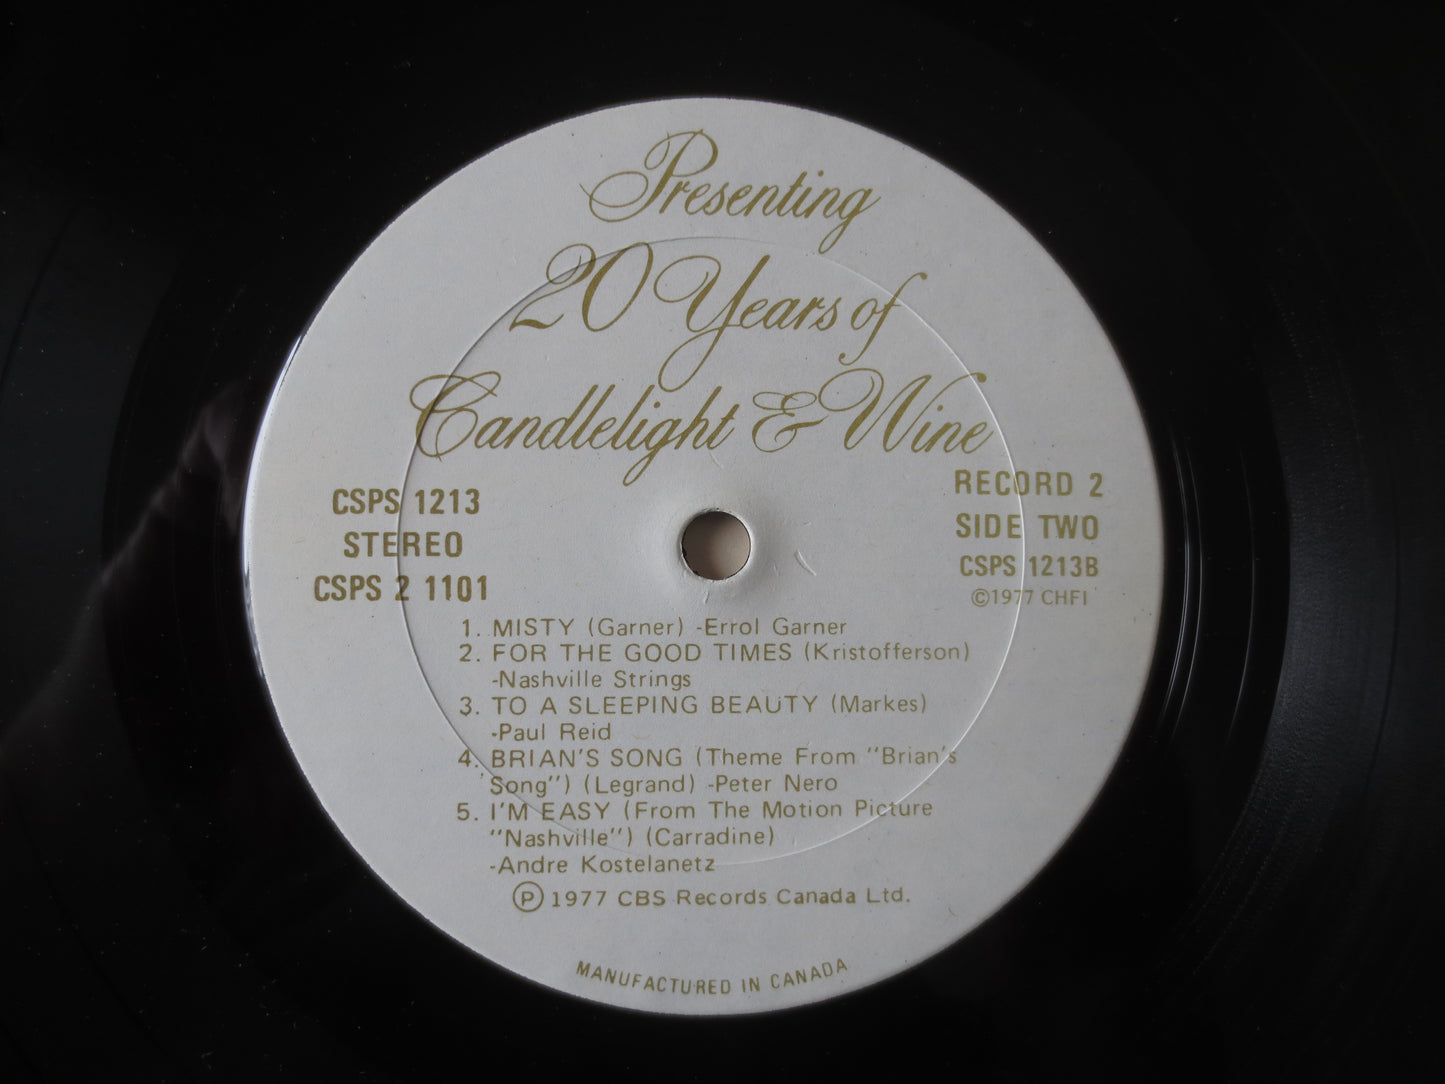 CANDLELIGHT and WINE, ROMANTIC Music, Peter Nero Records, Vintage Vinyl, Record Vinyl, Records, Vinyl Albums, 1978 Records